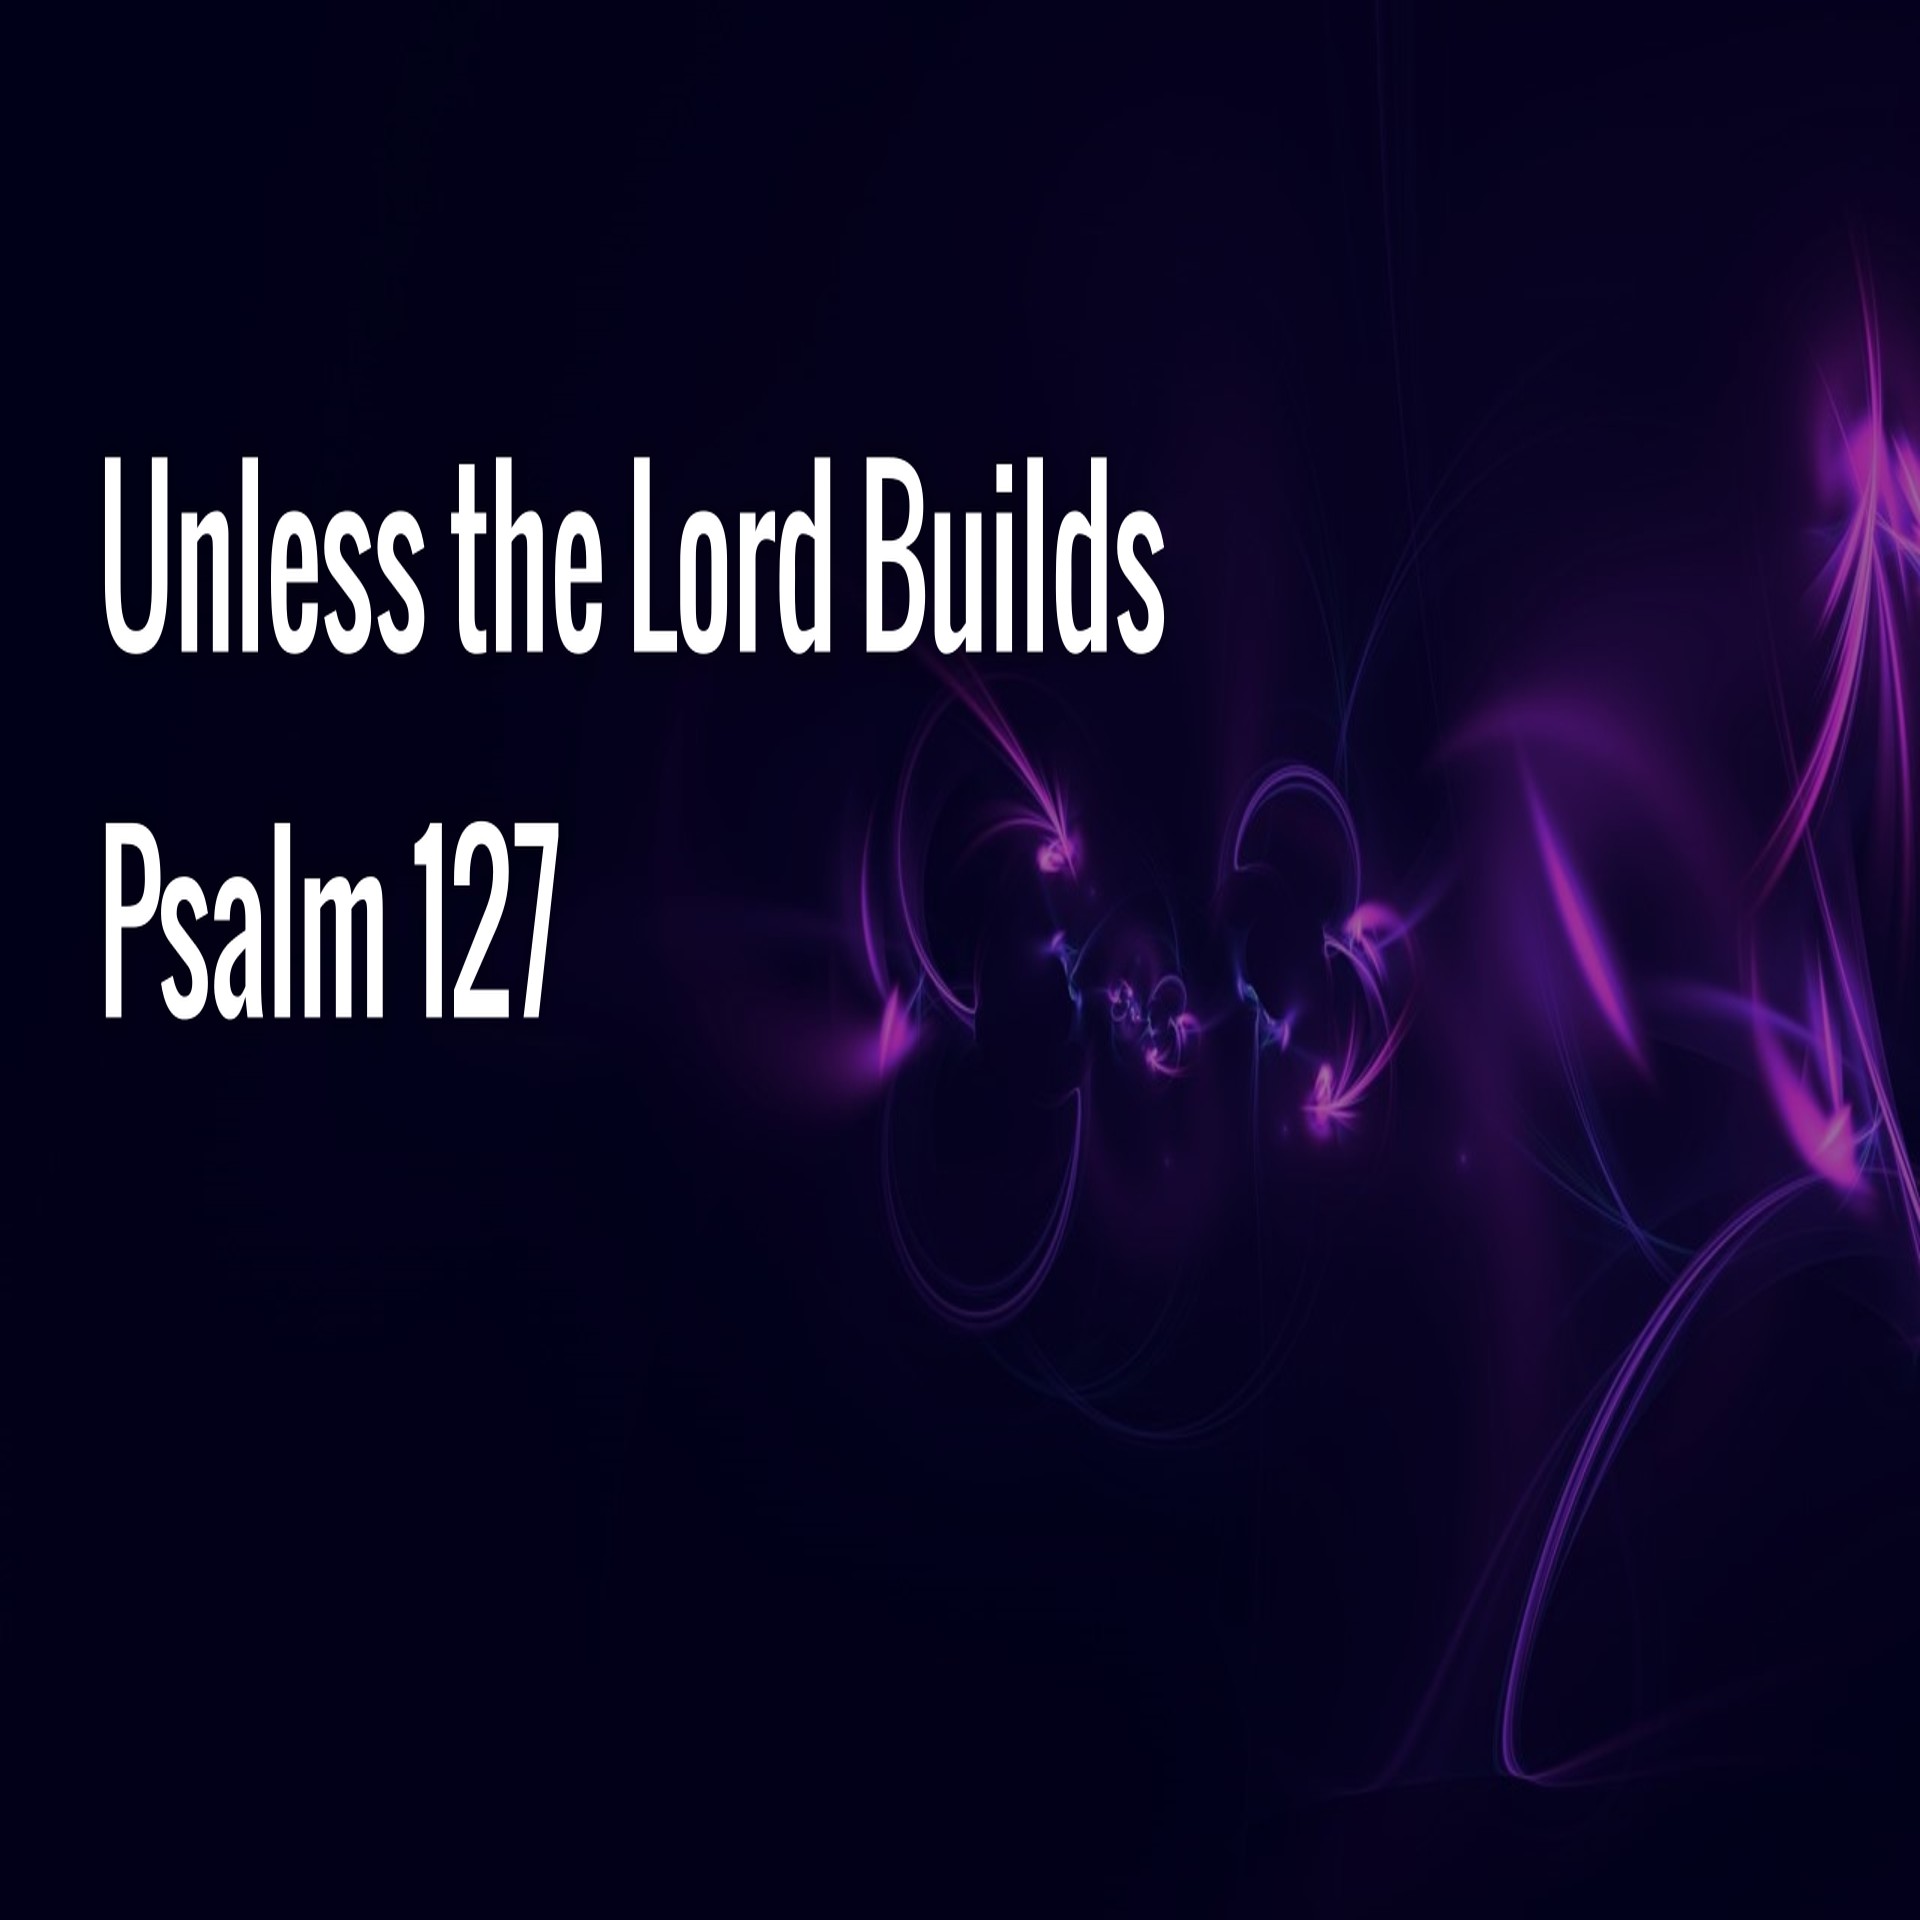 SERMON - Unless the Lord Builds - November 7, 2021